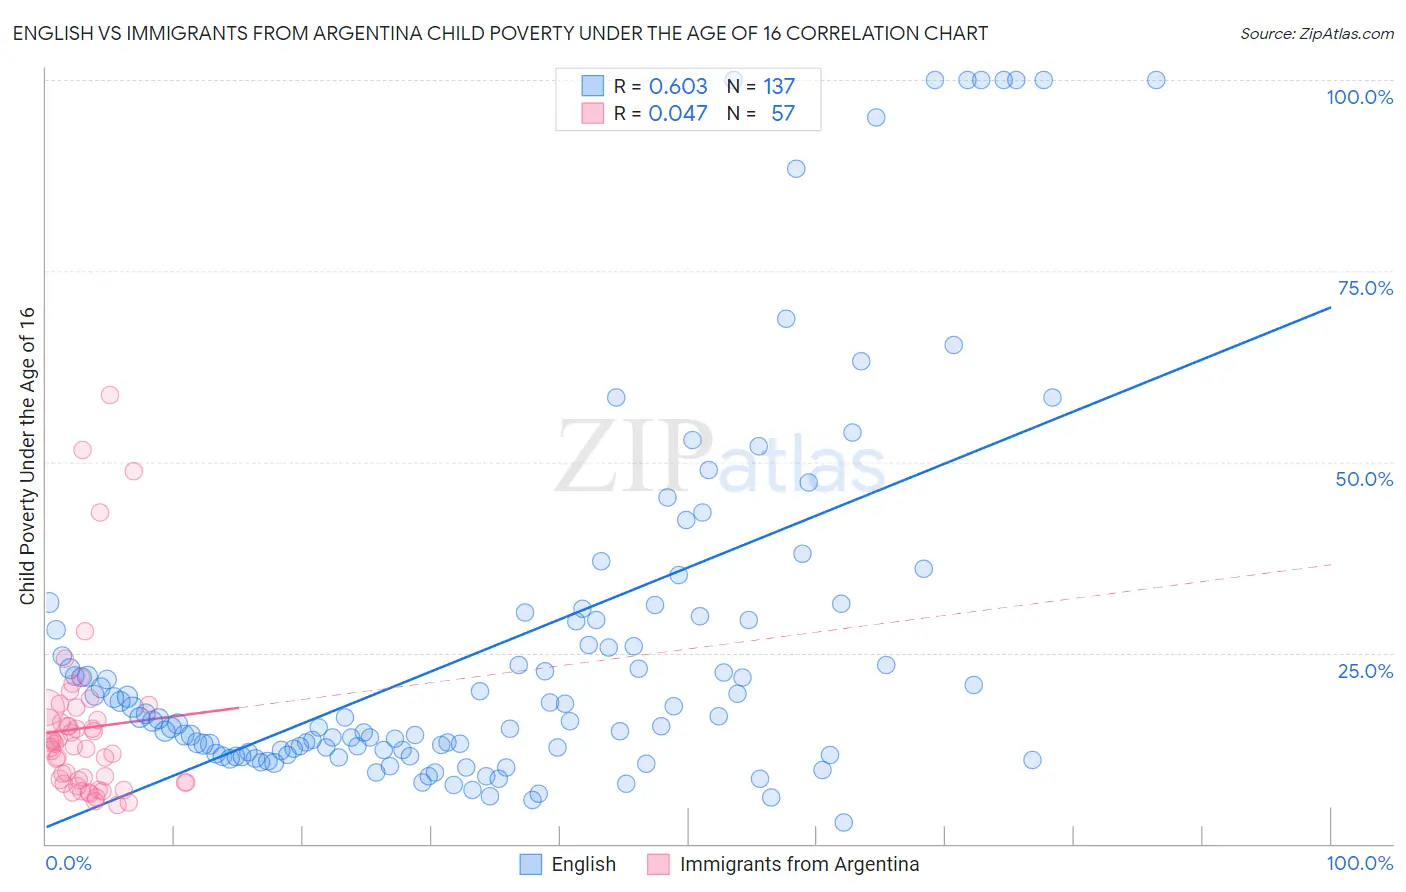 English vs Immigrants from Argentina Child Poverty Under the Age of 16